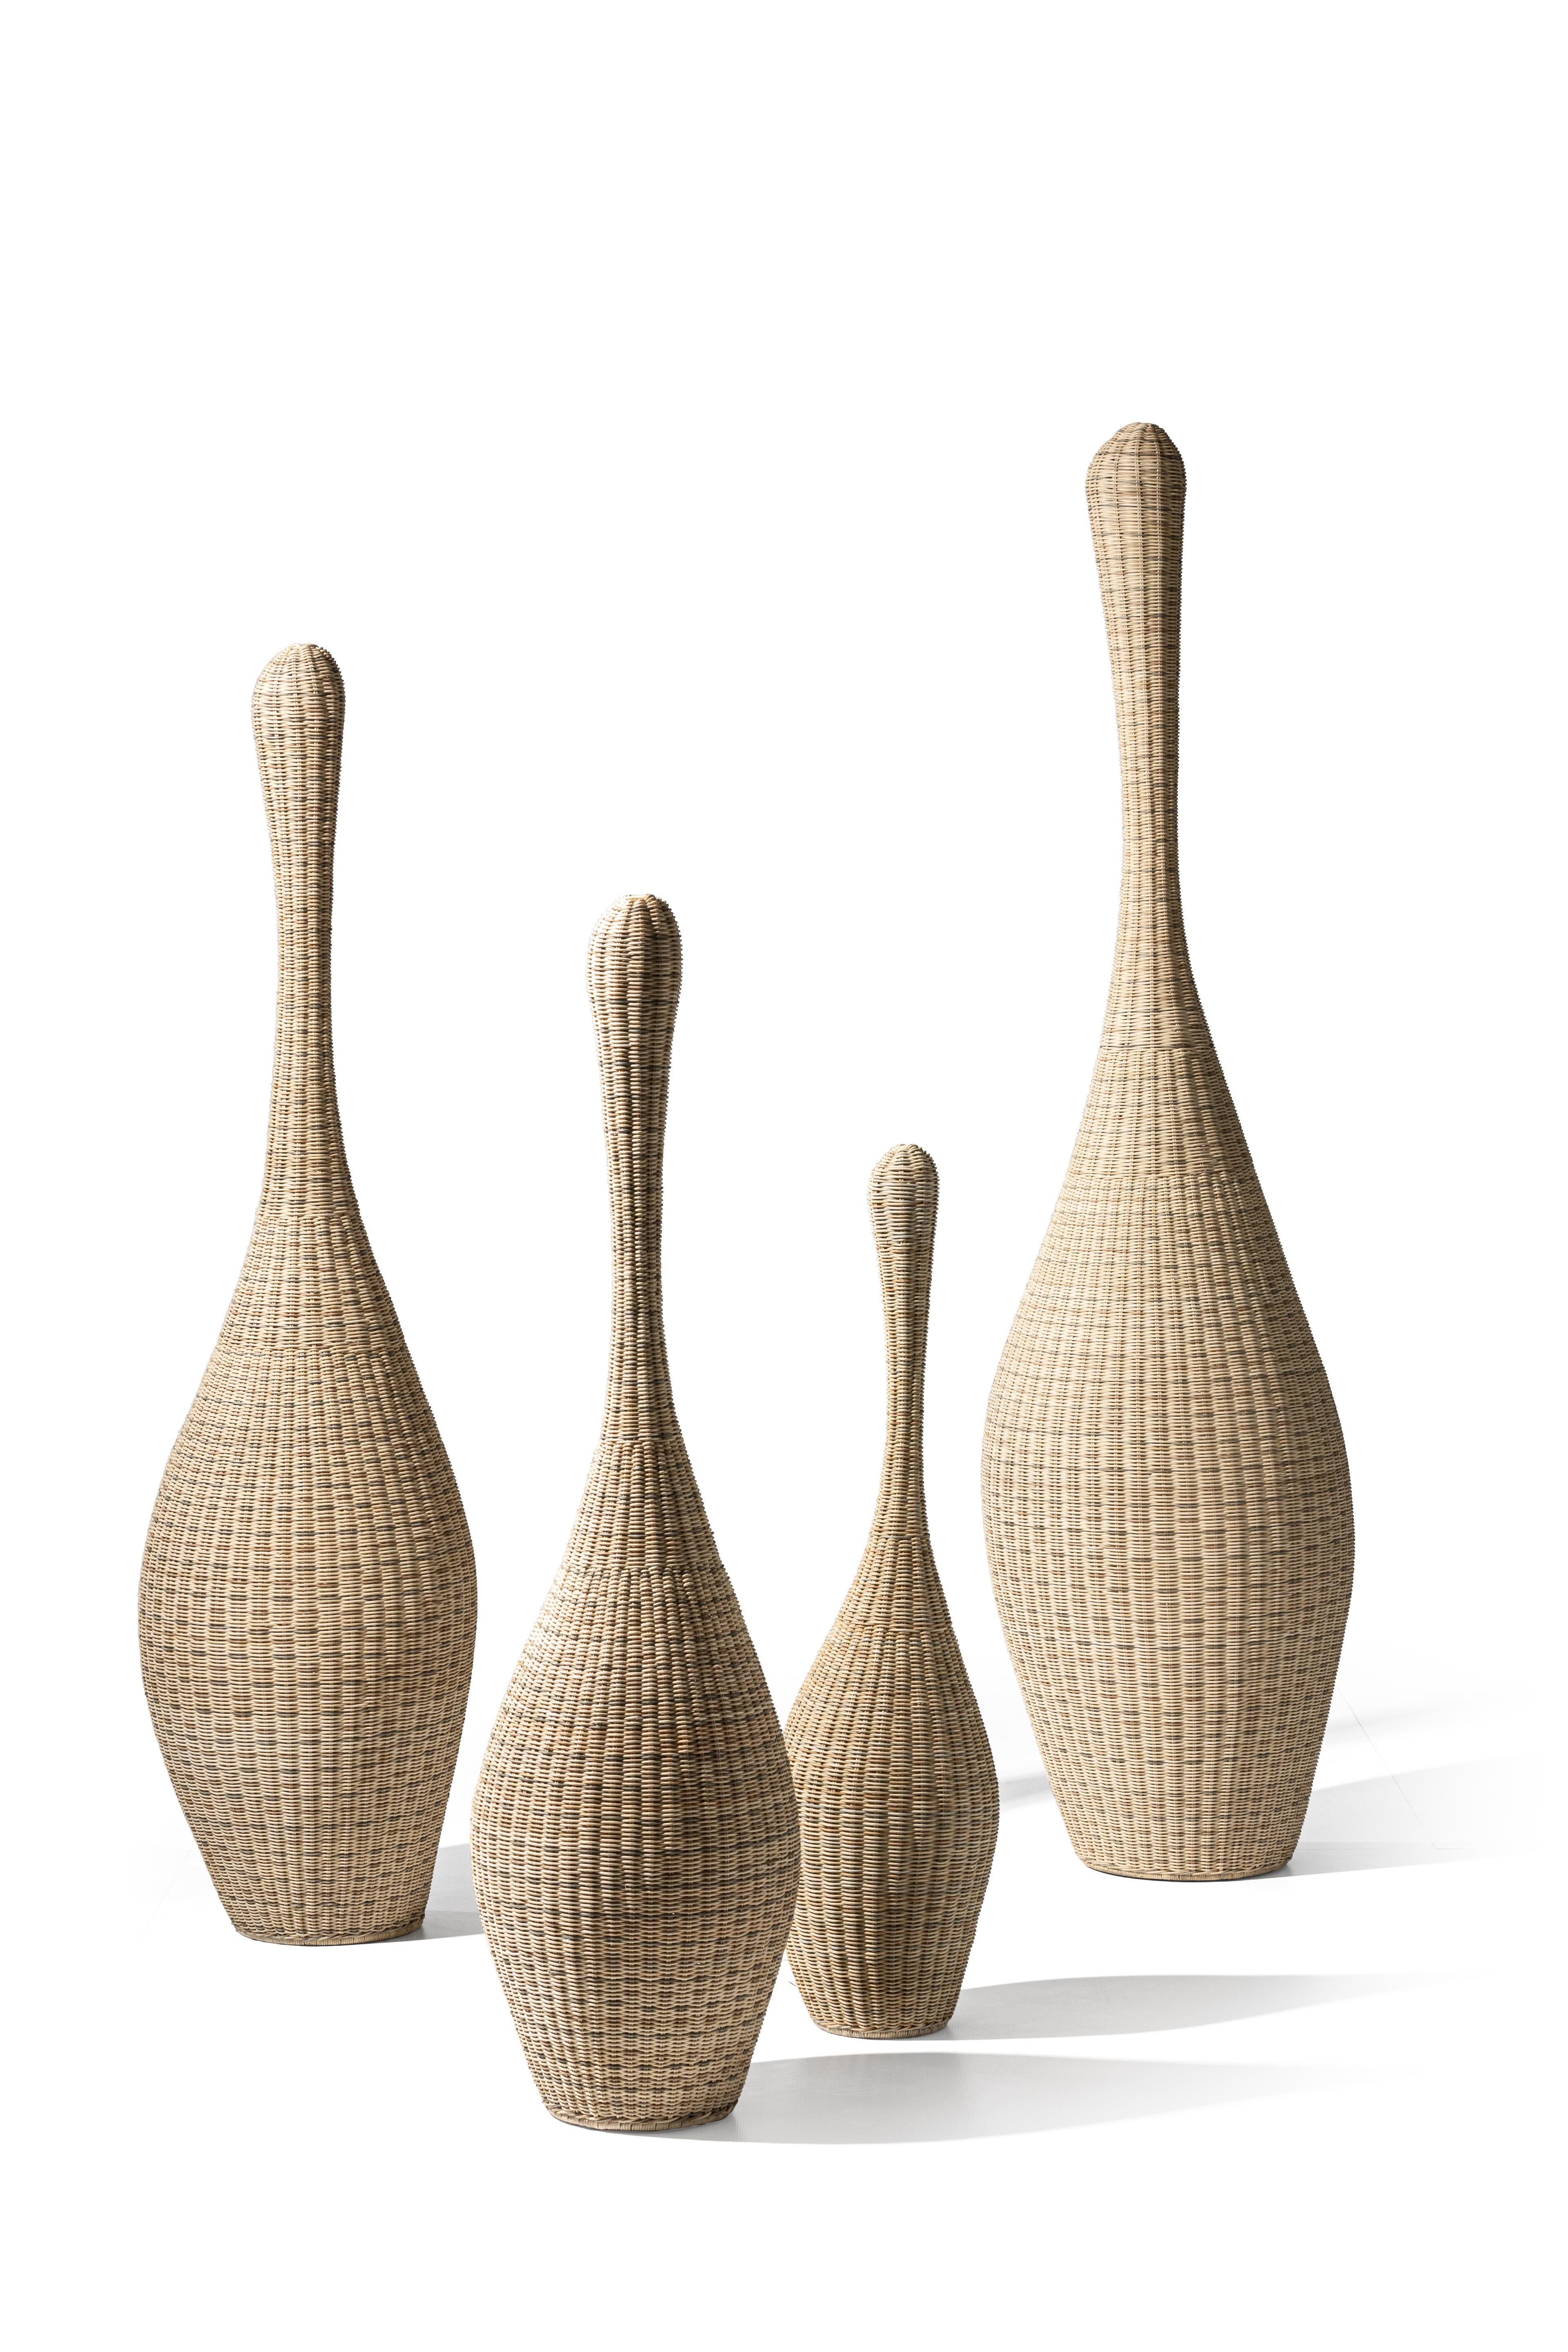 Modern Gervasoni Small Bolla Standing Lamp in Natural Rattan Core by Michael Sodeau For Sale